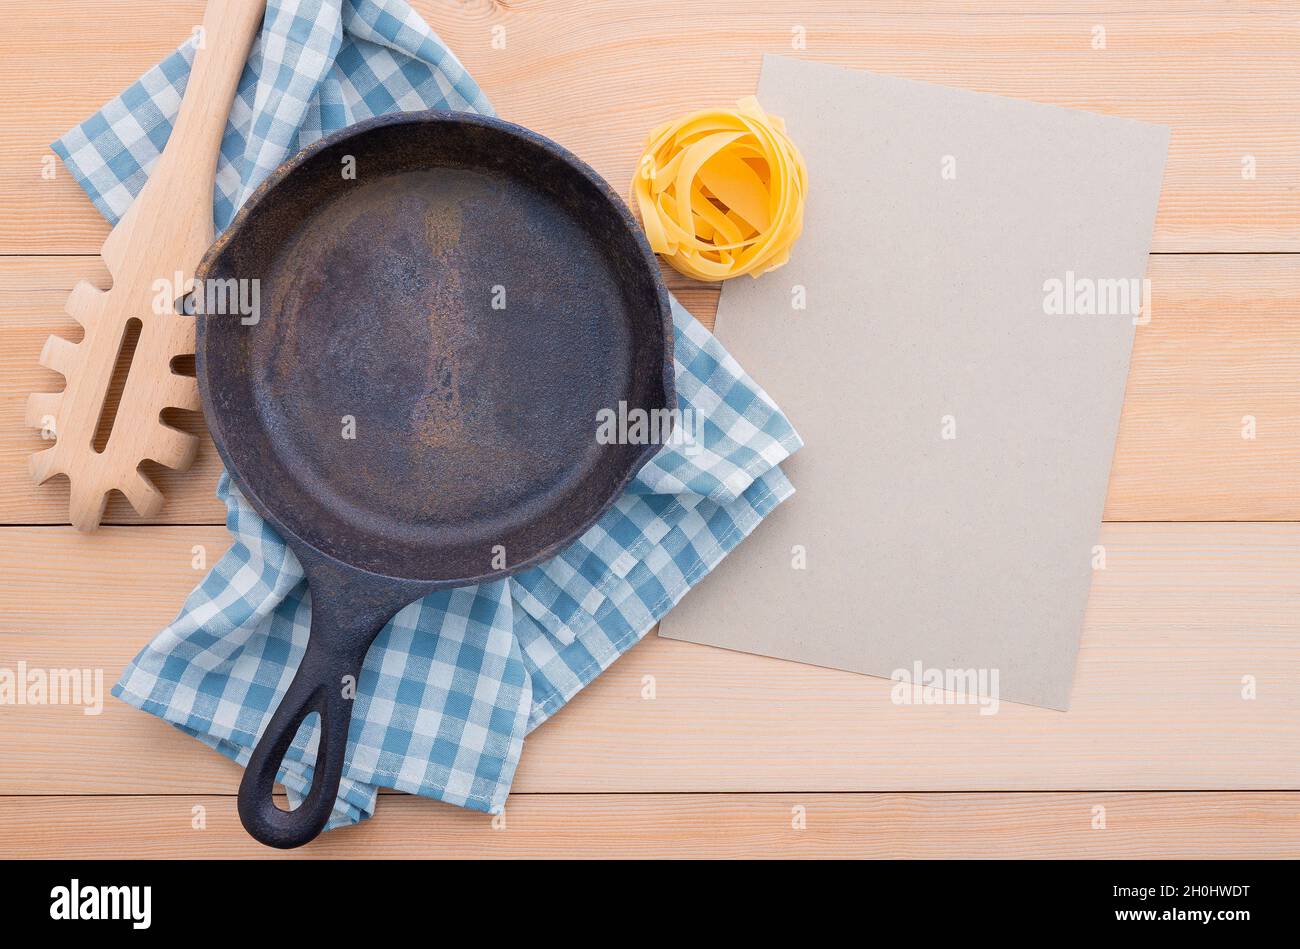 Food background for tasty Italian dishes with empty cast iron skillet and  pasta ladle on wooden background. Top view italian foods concept and menu d Stock Photo